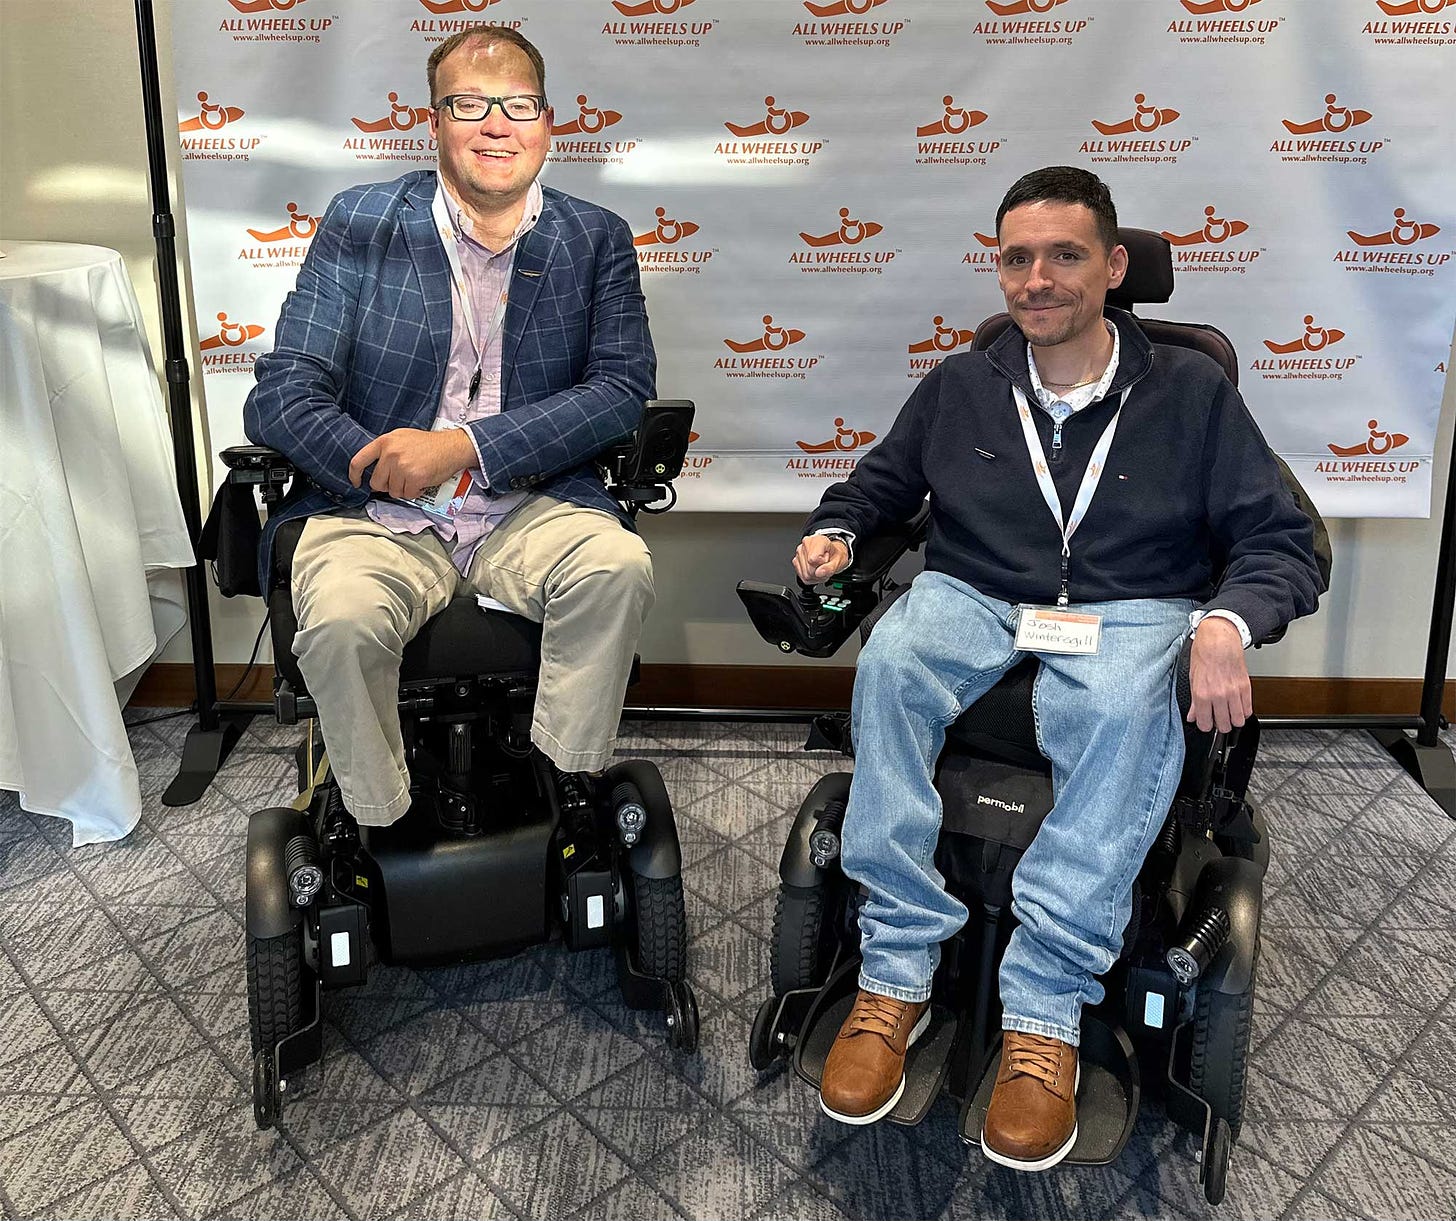 John pictured with Josh Wintersgill, both of whom are seated in their power wheelchairs.